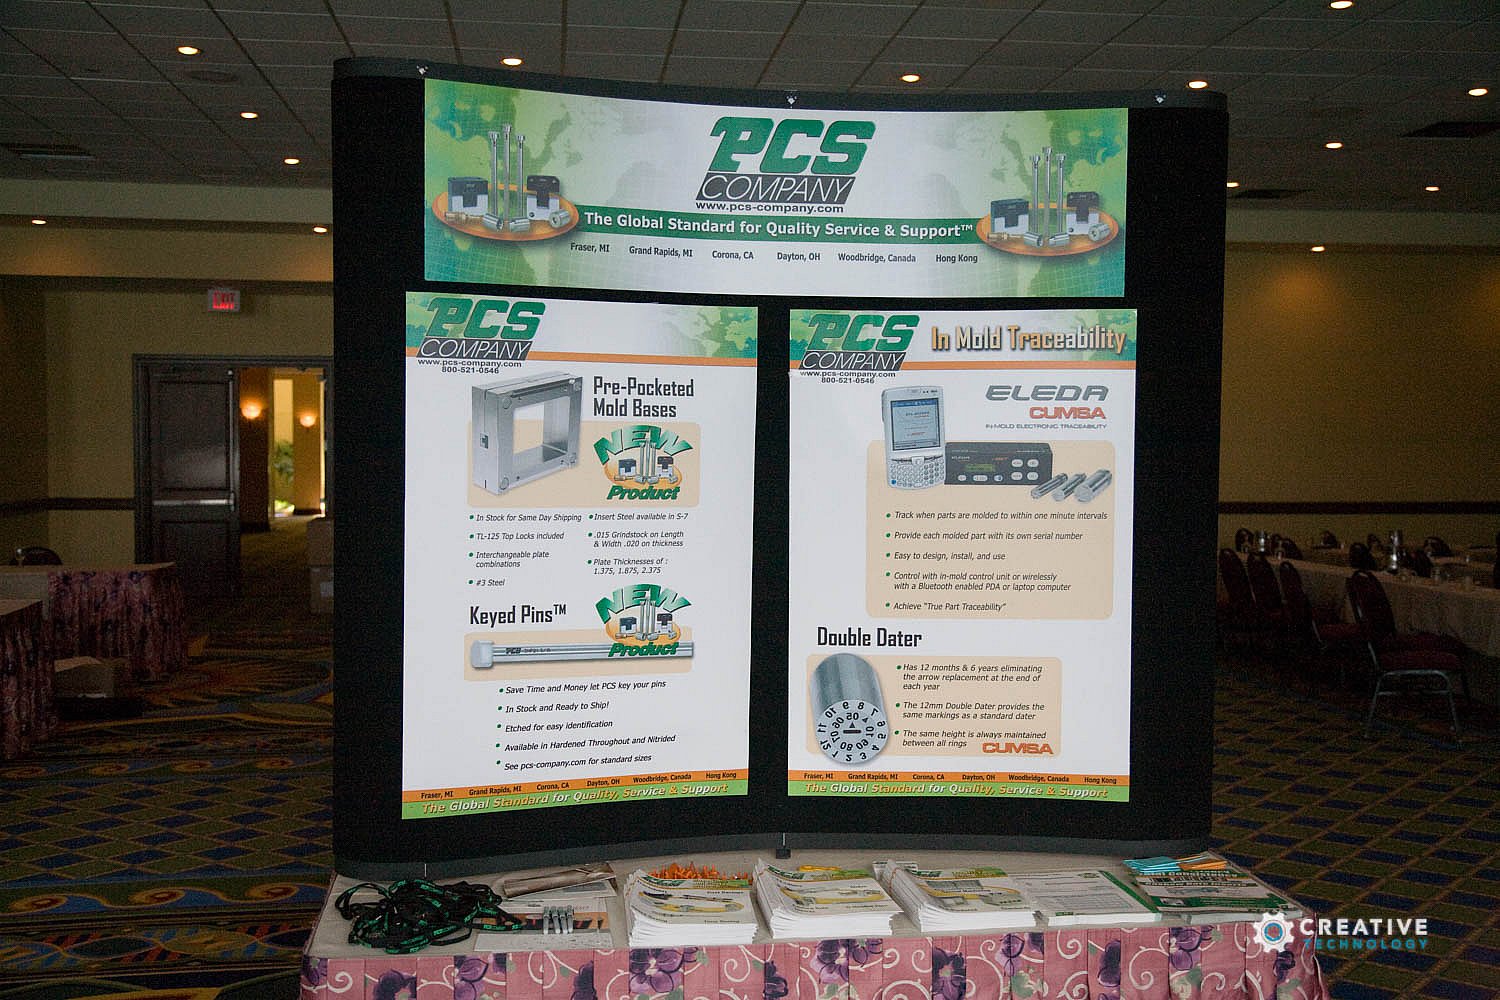 PCS Company Tabletop Exhibit - 2007 Annual Conference - St Thomas